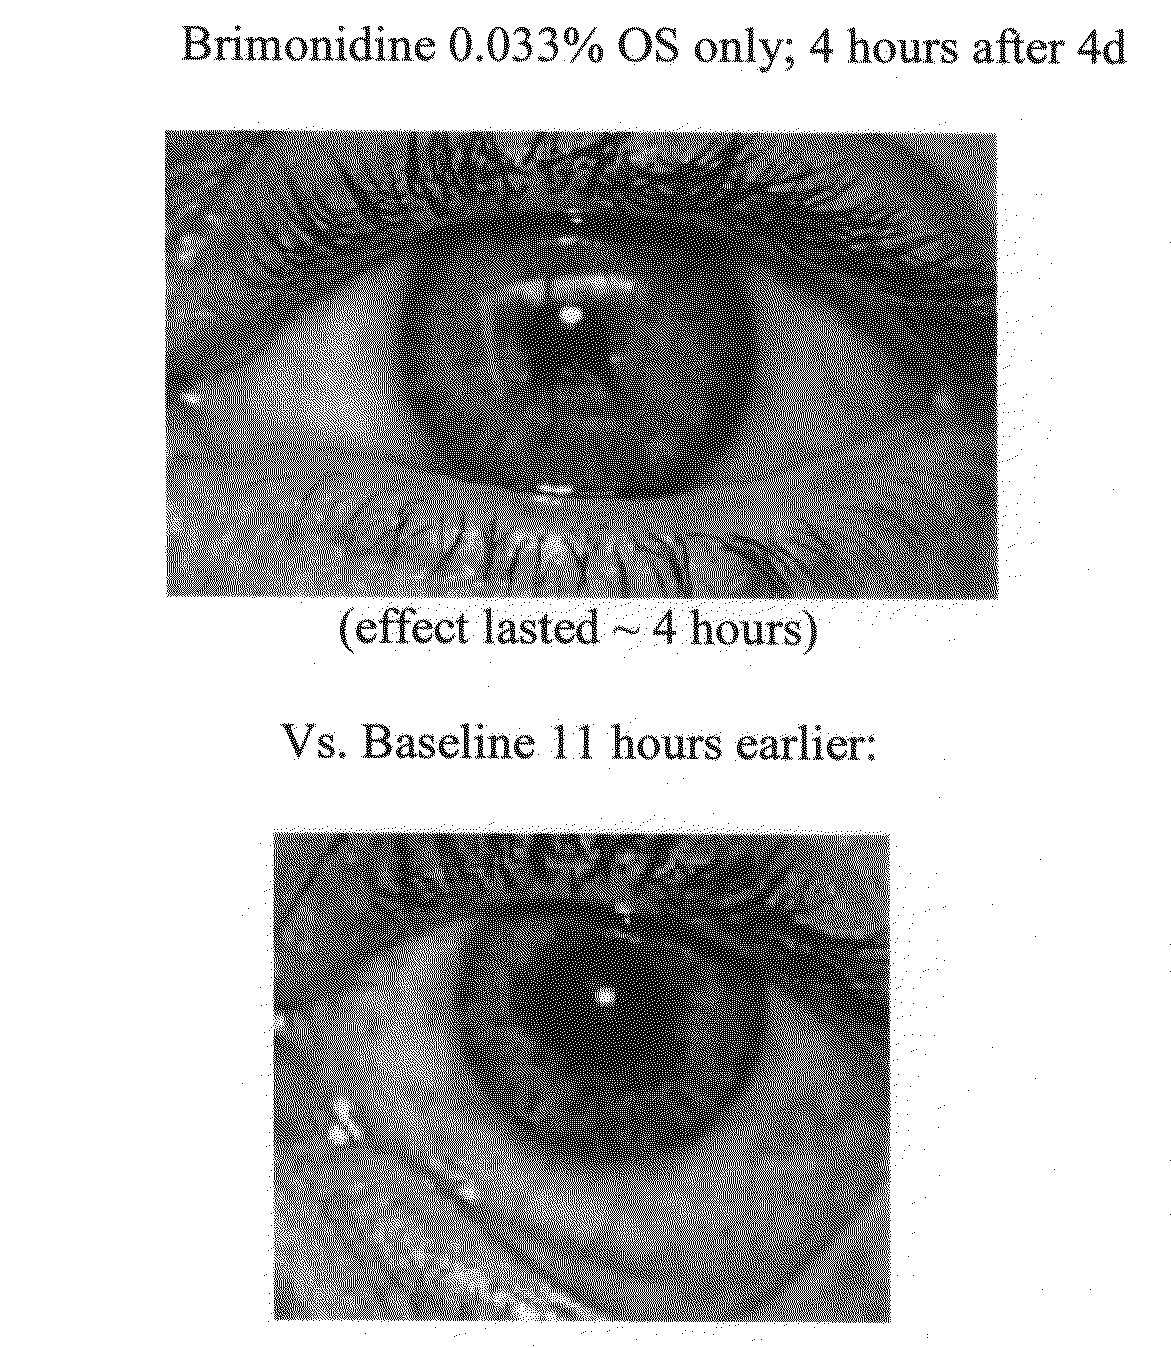 Vasoconstriction compositions and methods of use